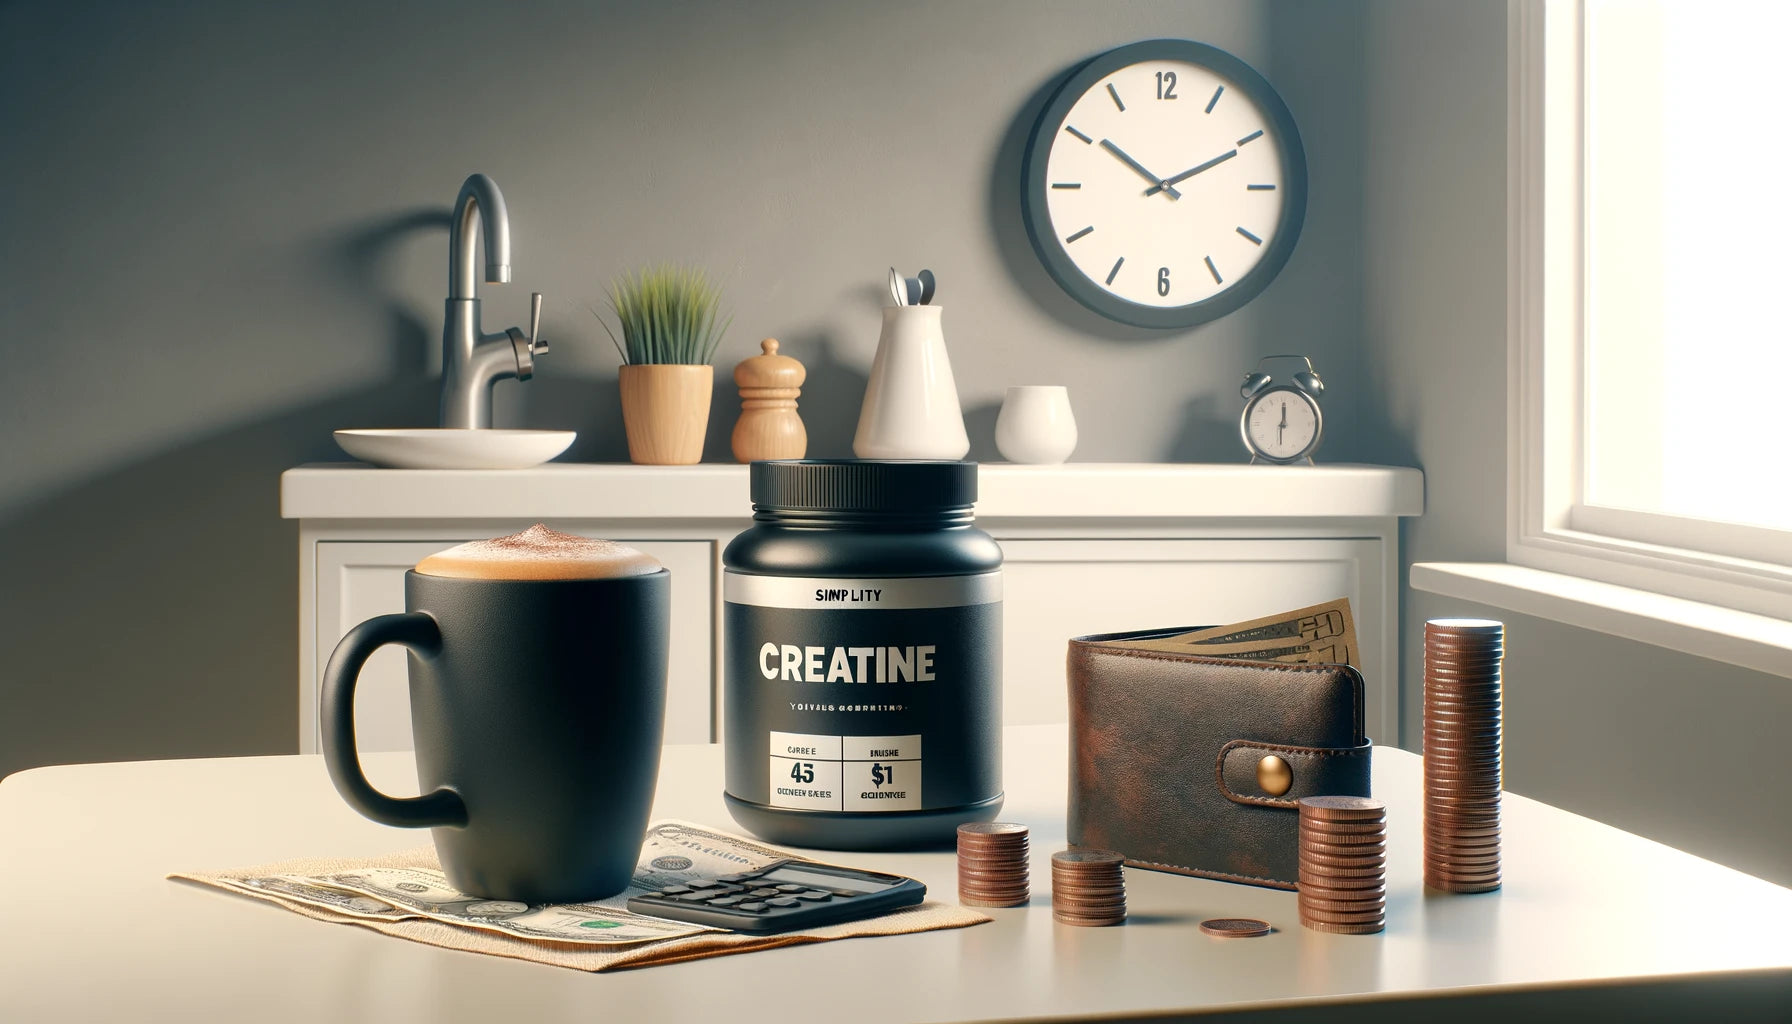 Simplicity in a Cup - A minimalist kitchen scene with a cup of creatine coffee on a counter next to a wallet with coins, symbolizing affordability.